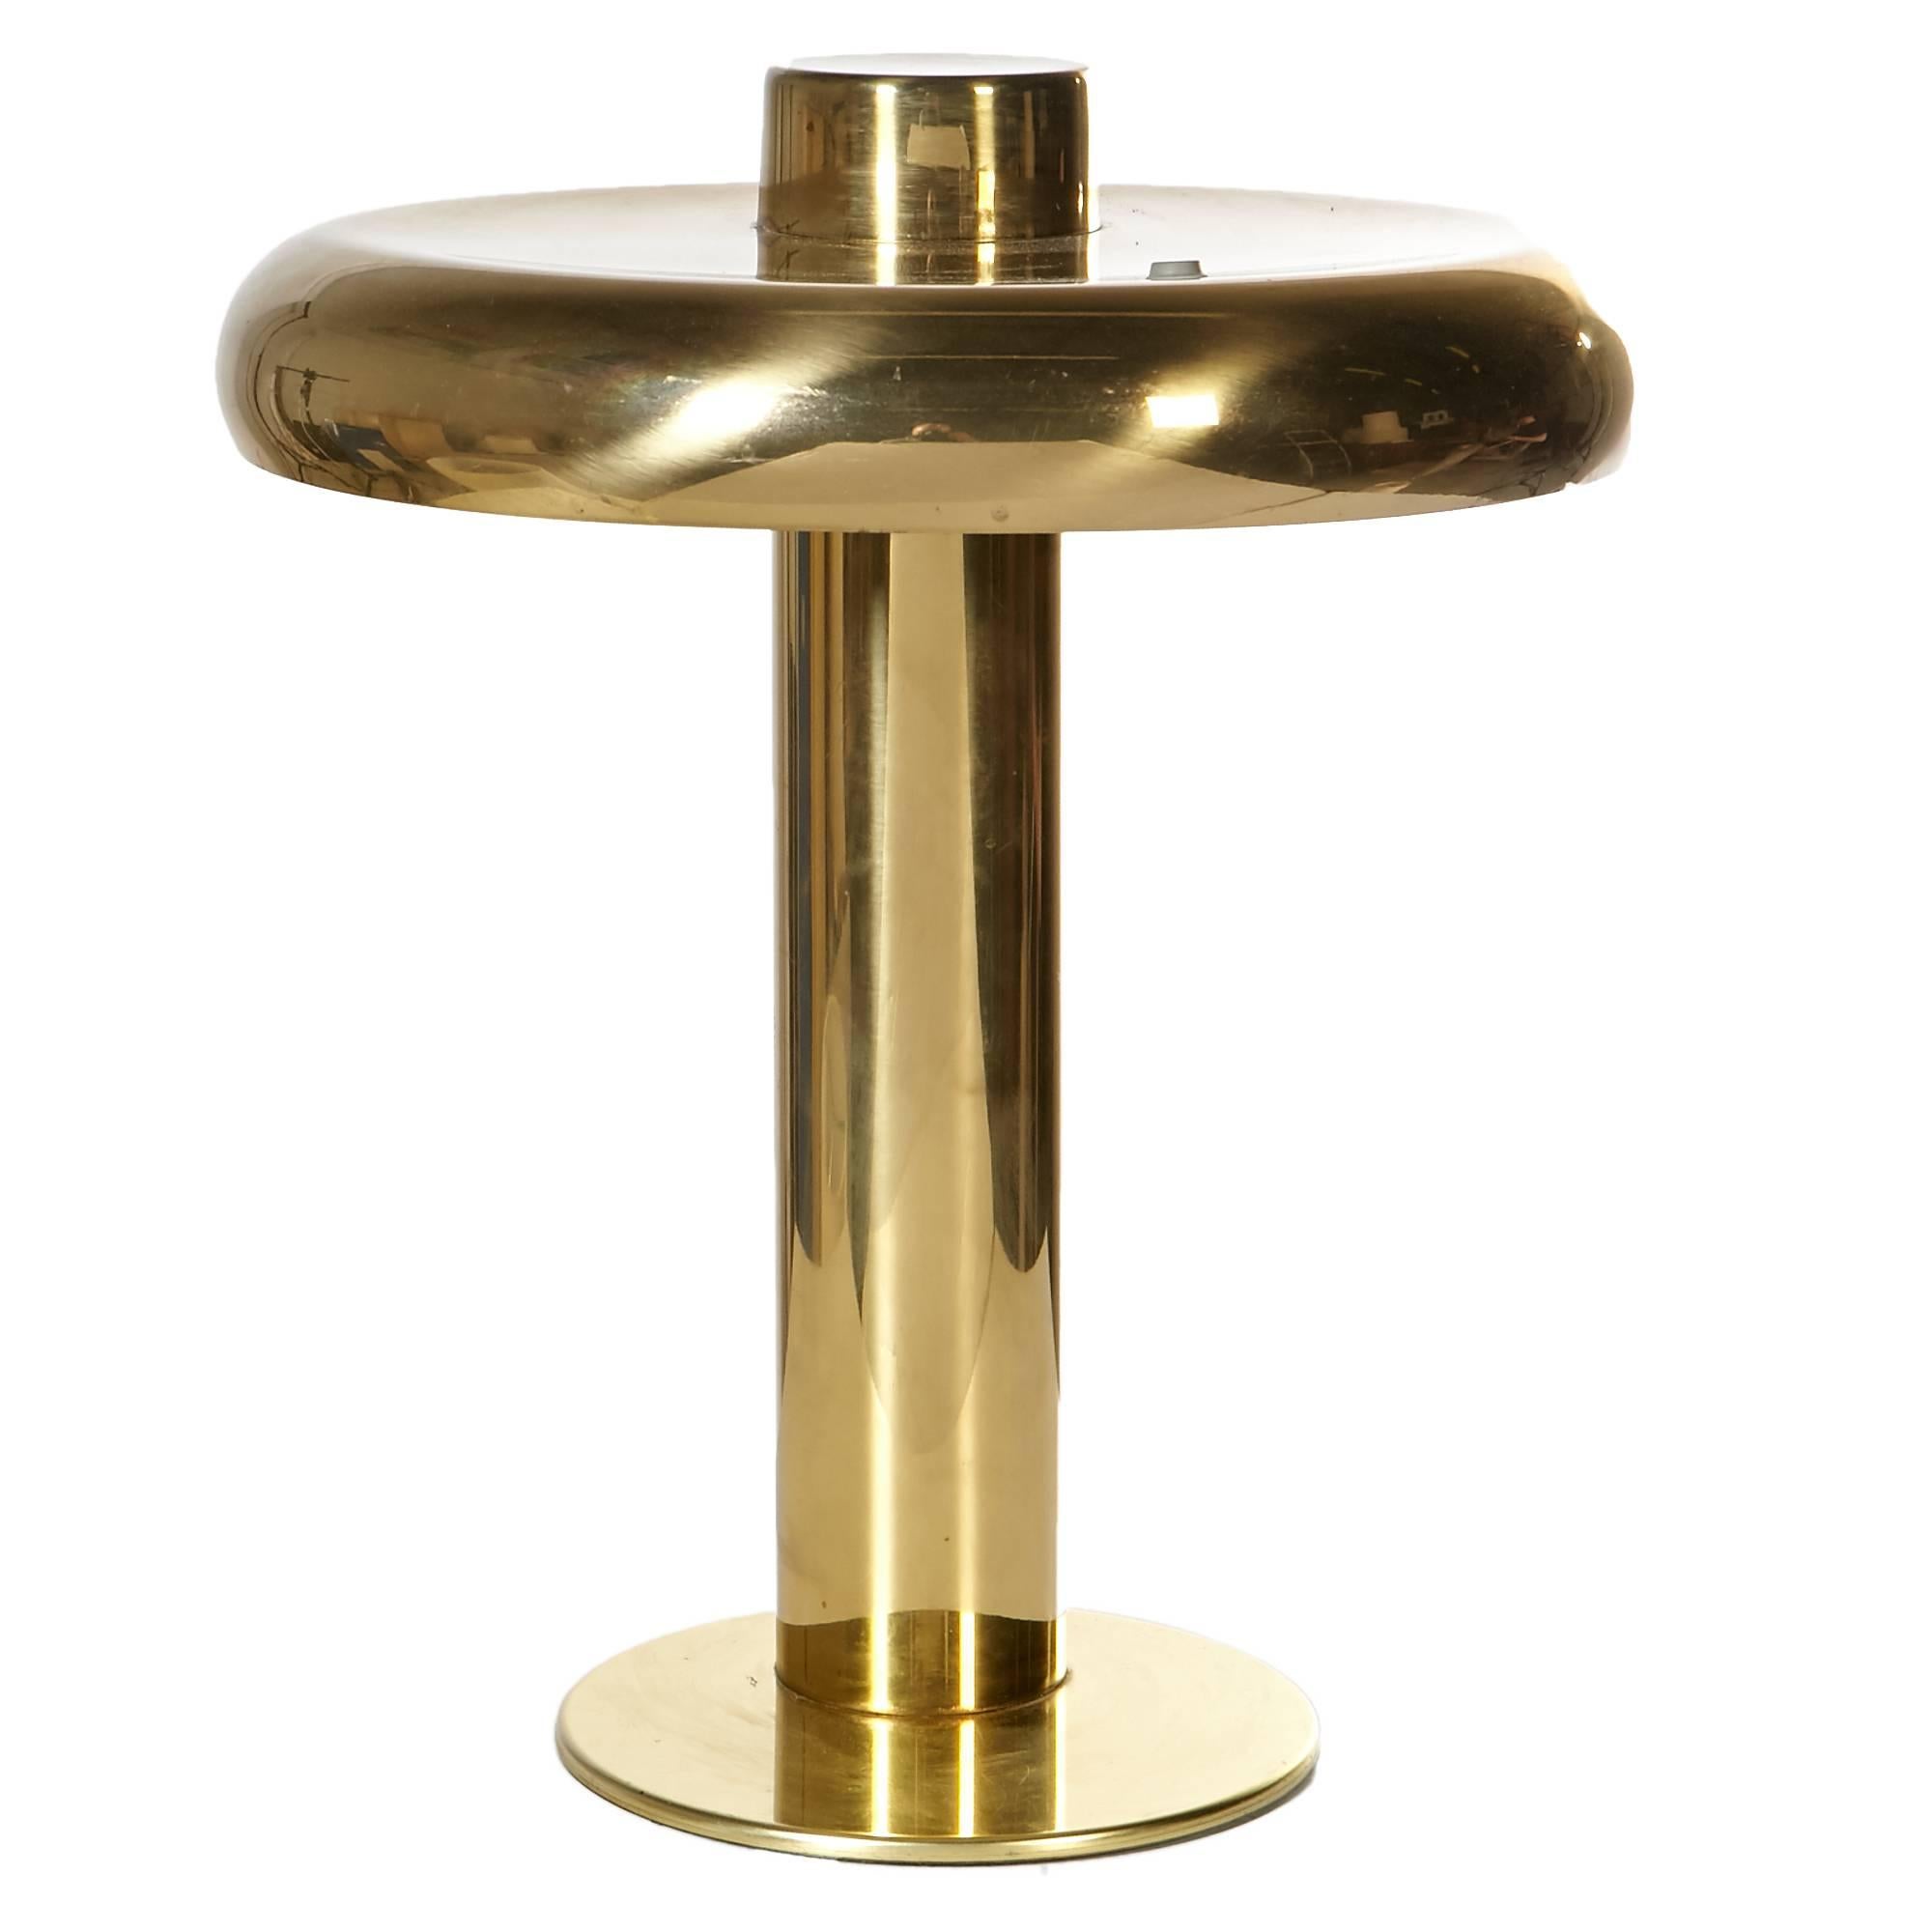 1970s brass desk or table lamp with a circular designed by Laurel Lamp Co. Wired for the US and in working condition. Lighting source is a circular fluorescent bulb.